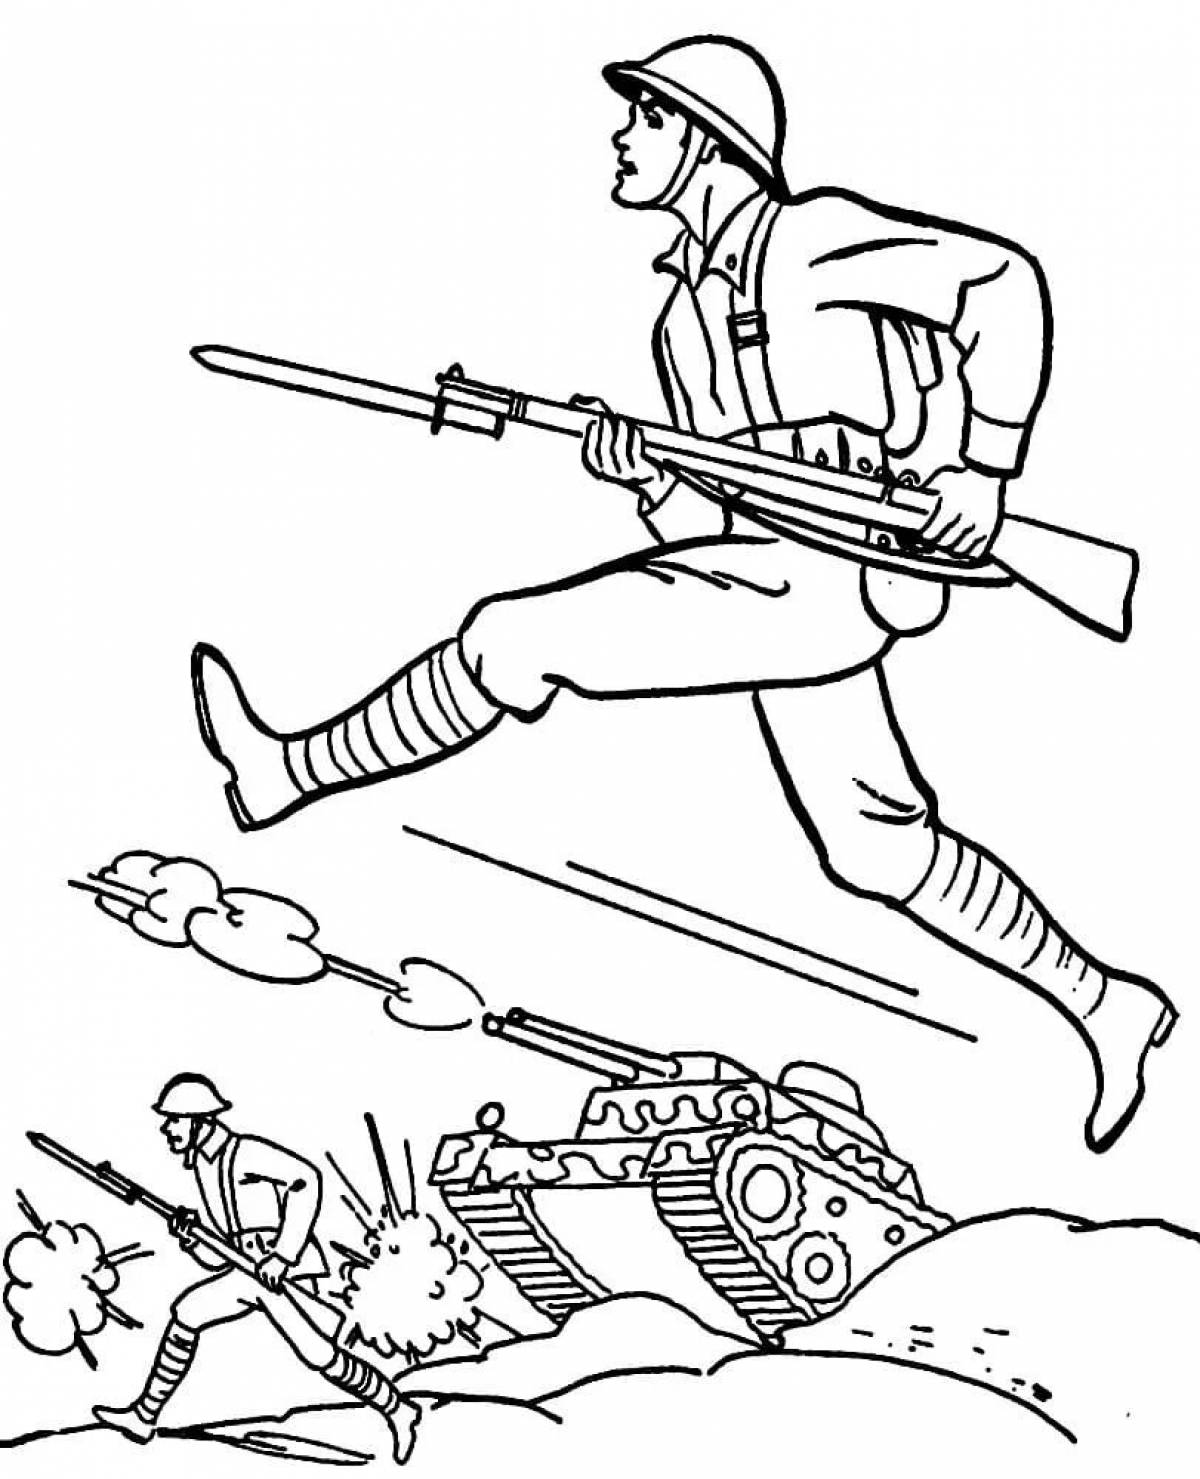 Quirky soldier and children's coloring book